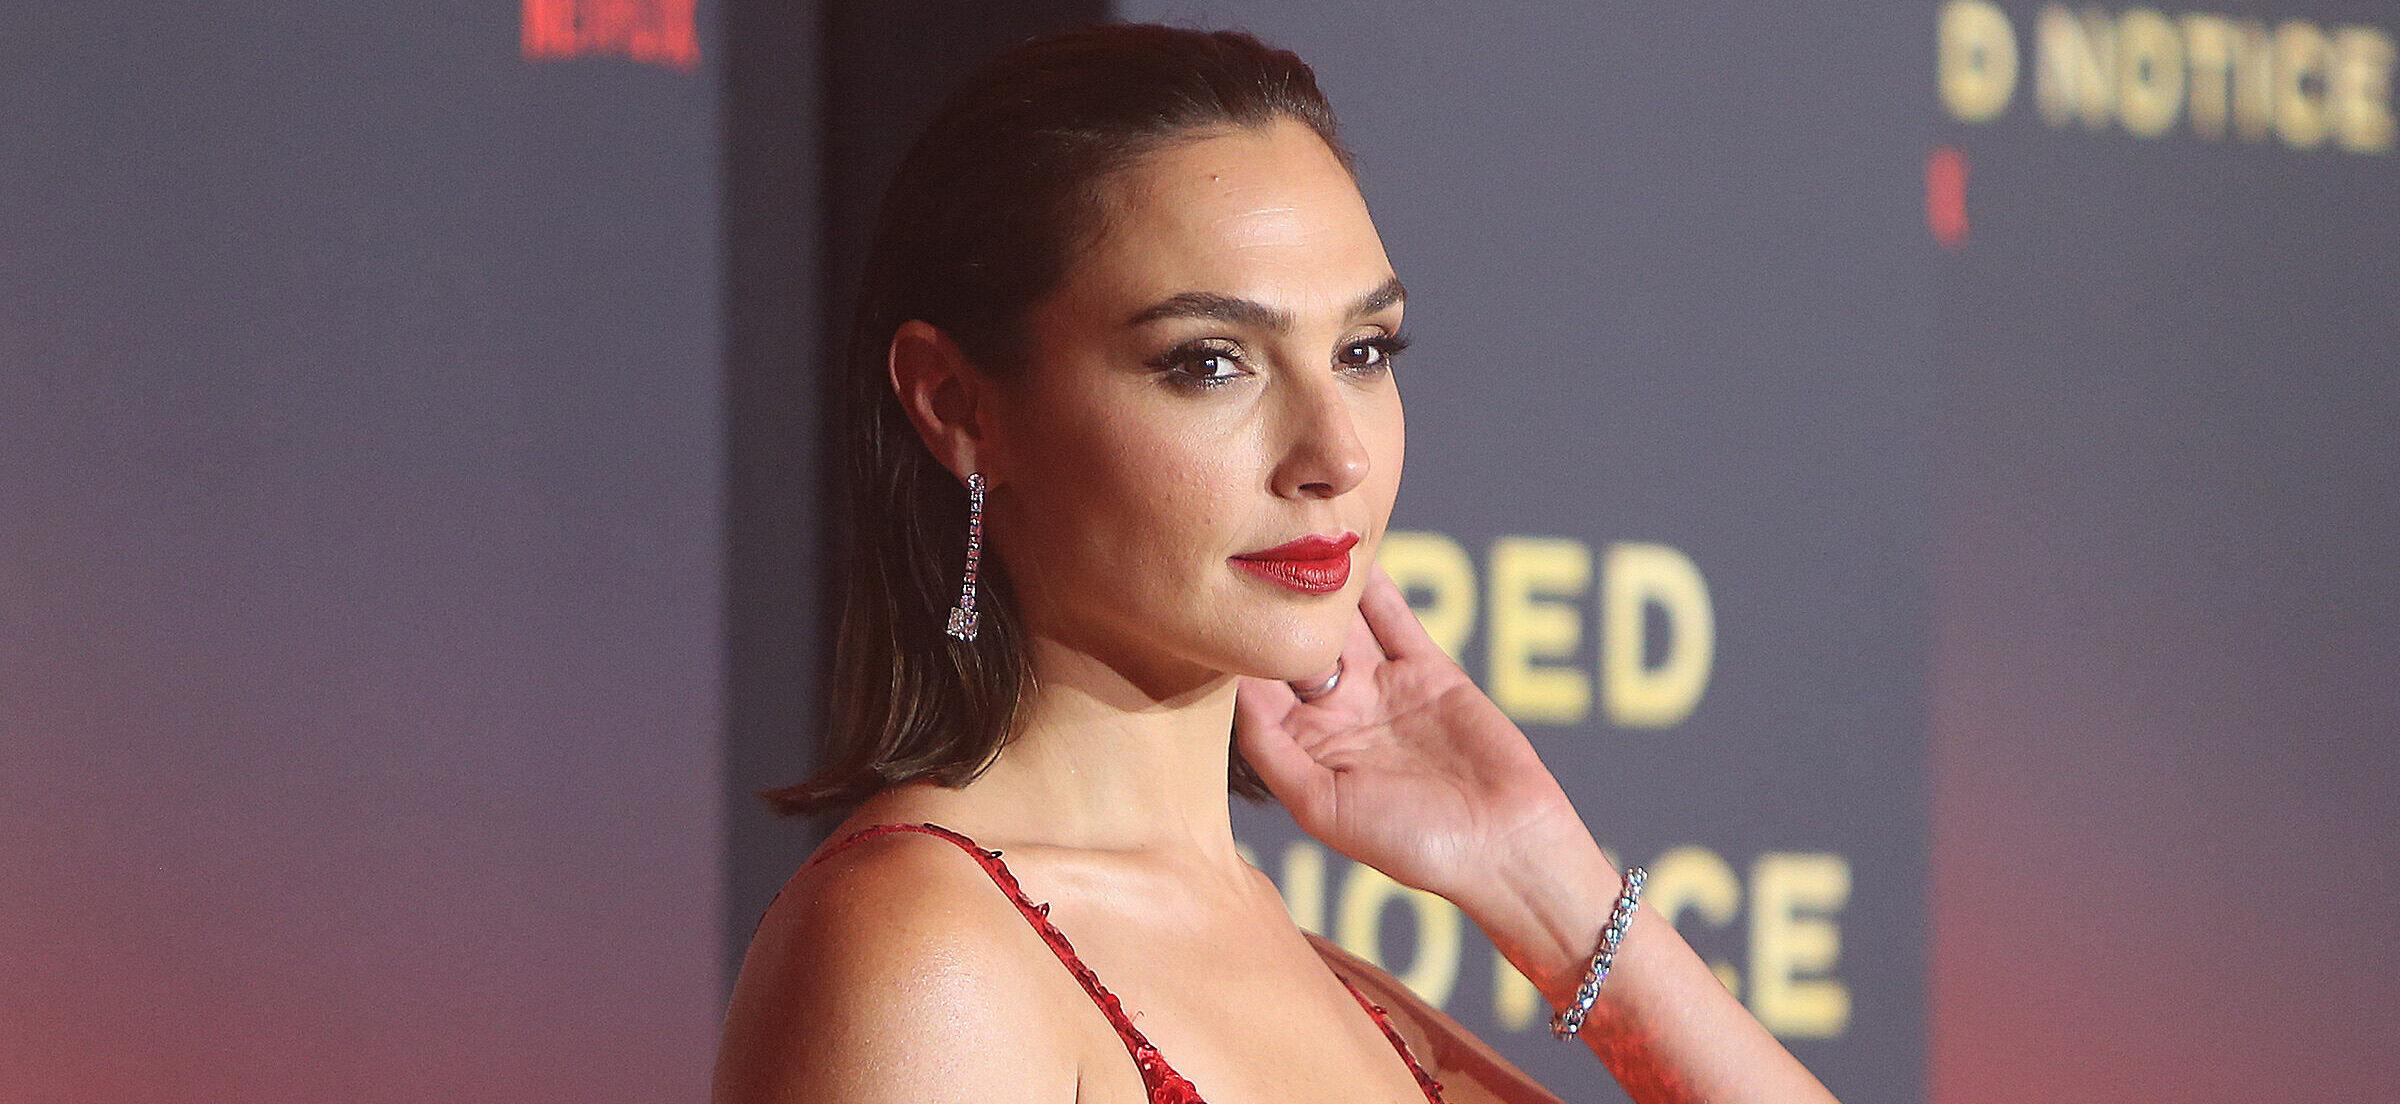 Gal Gadot at the World Premiere Of Netflix's "Red Notice" - Arrivals